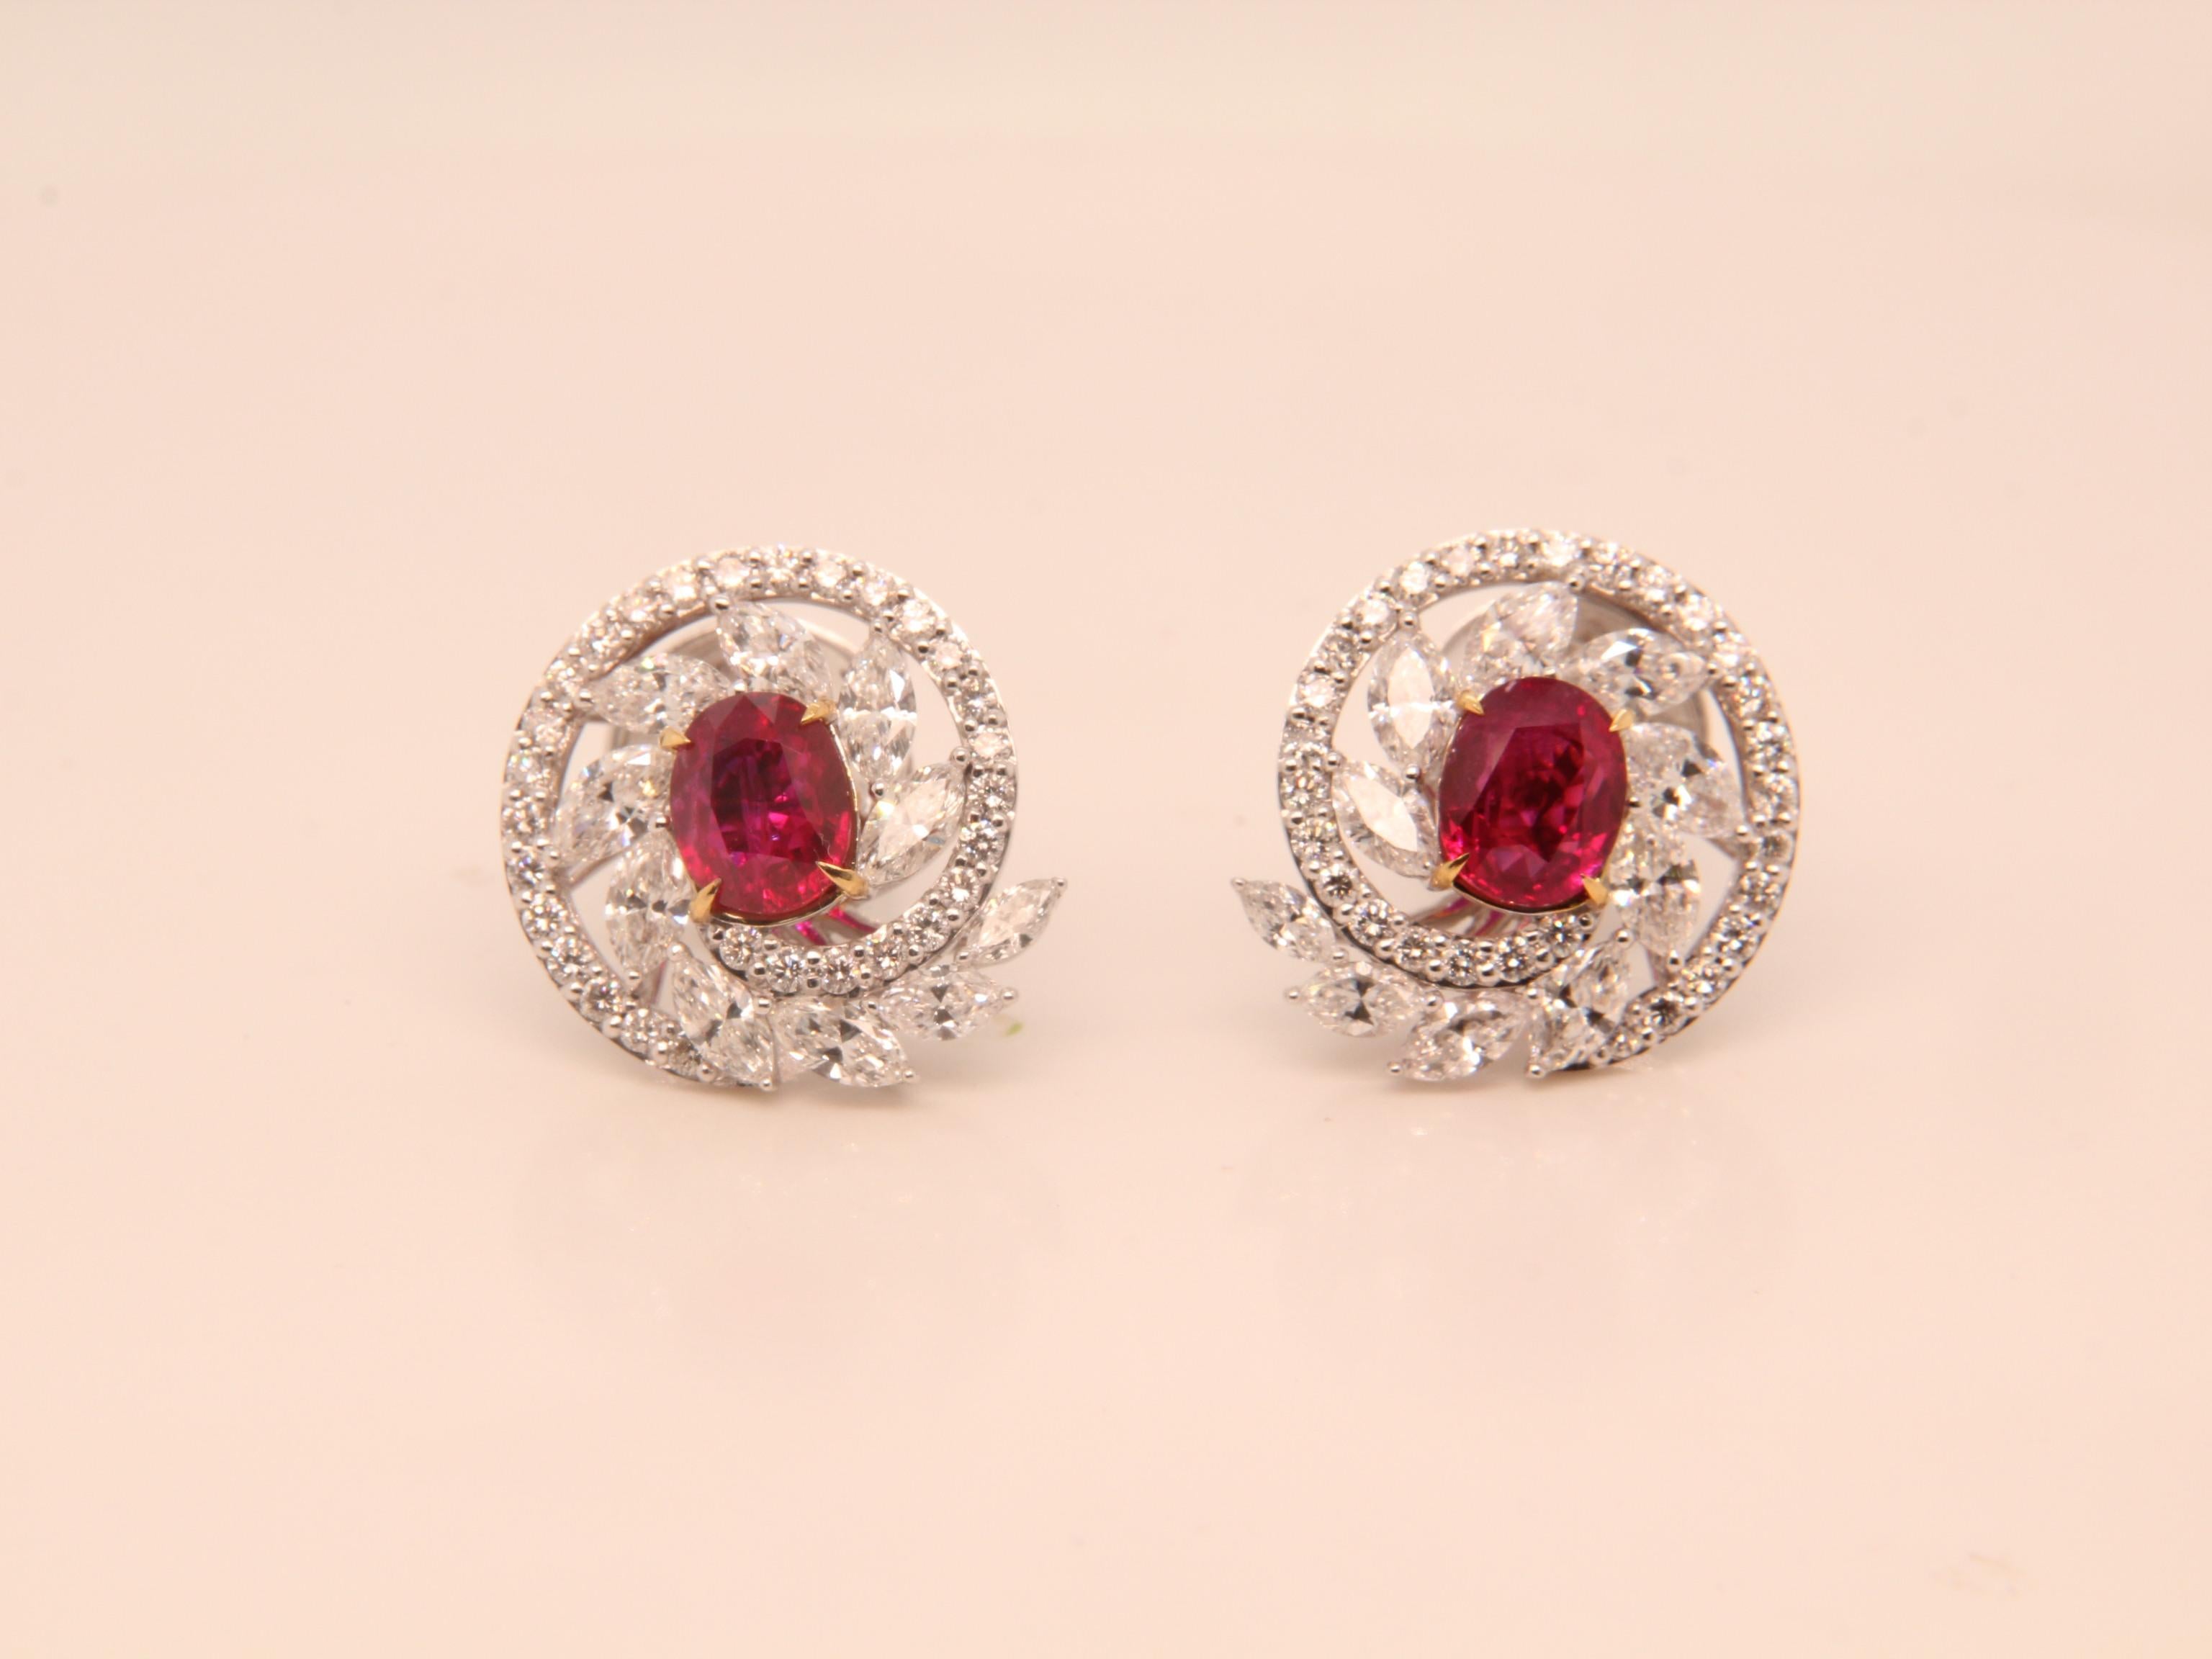 A brand new ruby and diamond earring by Rewa. The Burmese 'Pigeon Blood' ruby weigh 1.34 and 1.14 carat each and they are both certified by Gem Research Swisslab (GRS). The rubies are surrounded by 2.65 carat diamonds studded on 18k white gold 8.78